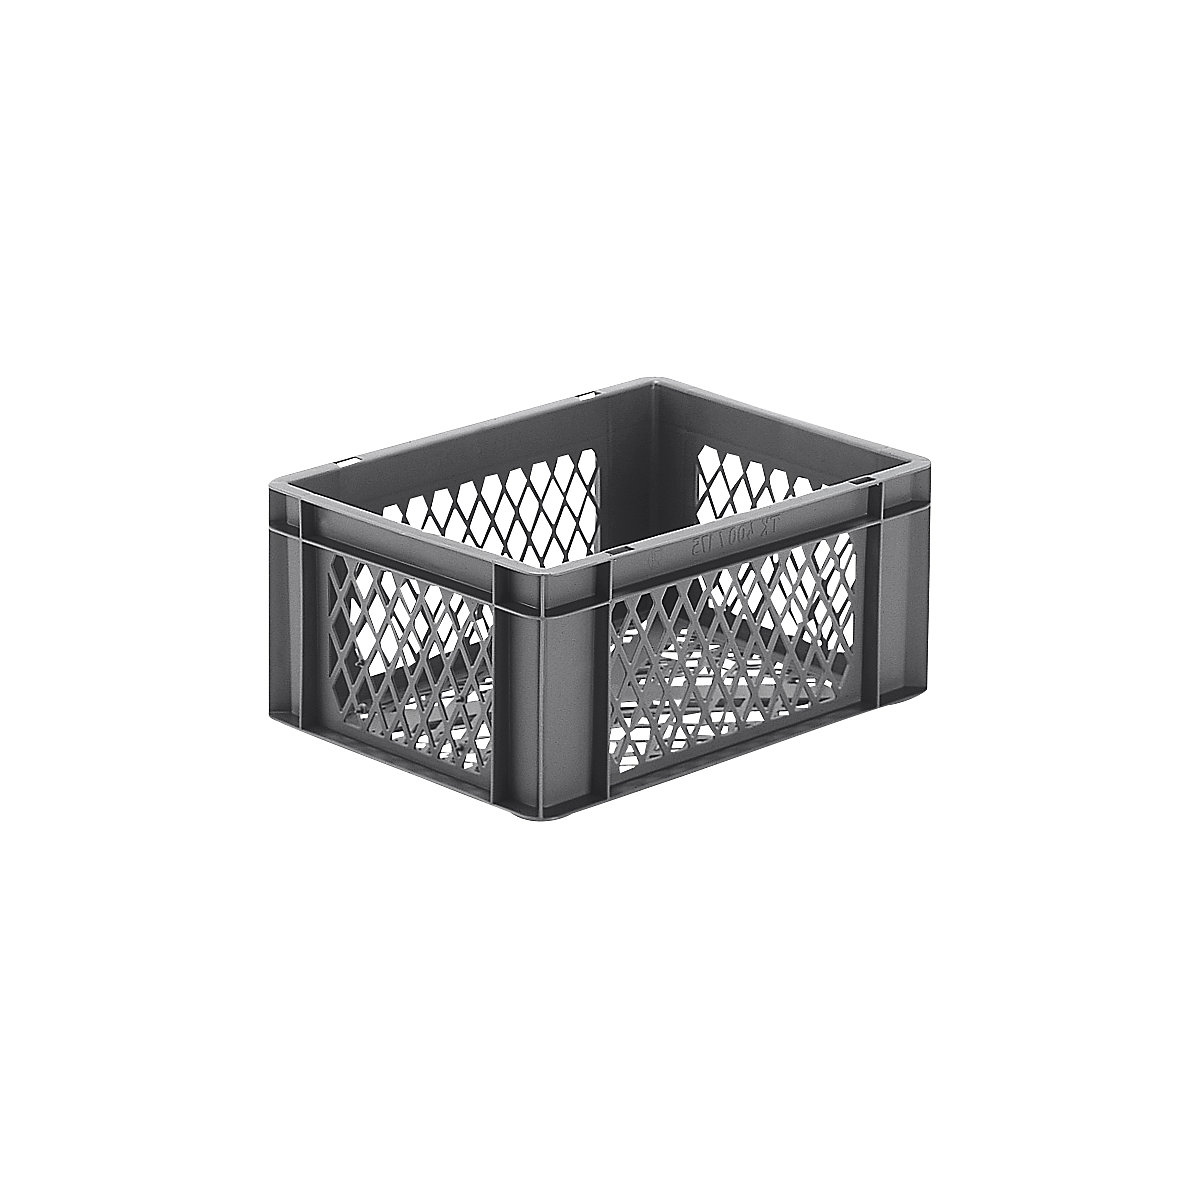 Euro stacking container, perforated walls and base, LxWxH 400 x 300 x 175 mm, grey, pack of 5-5